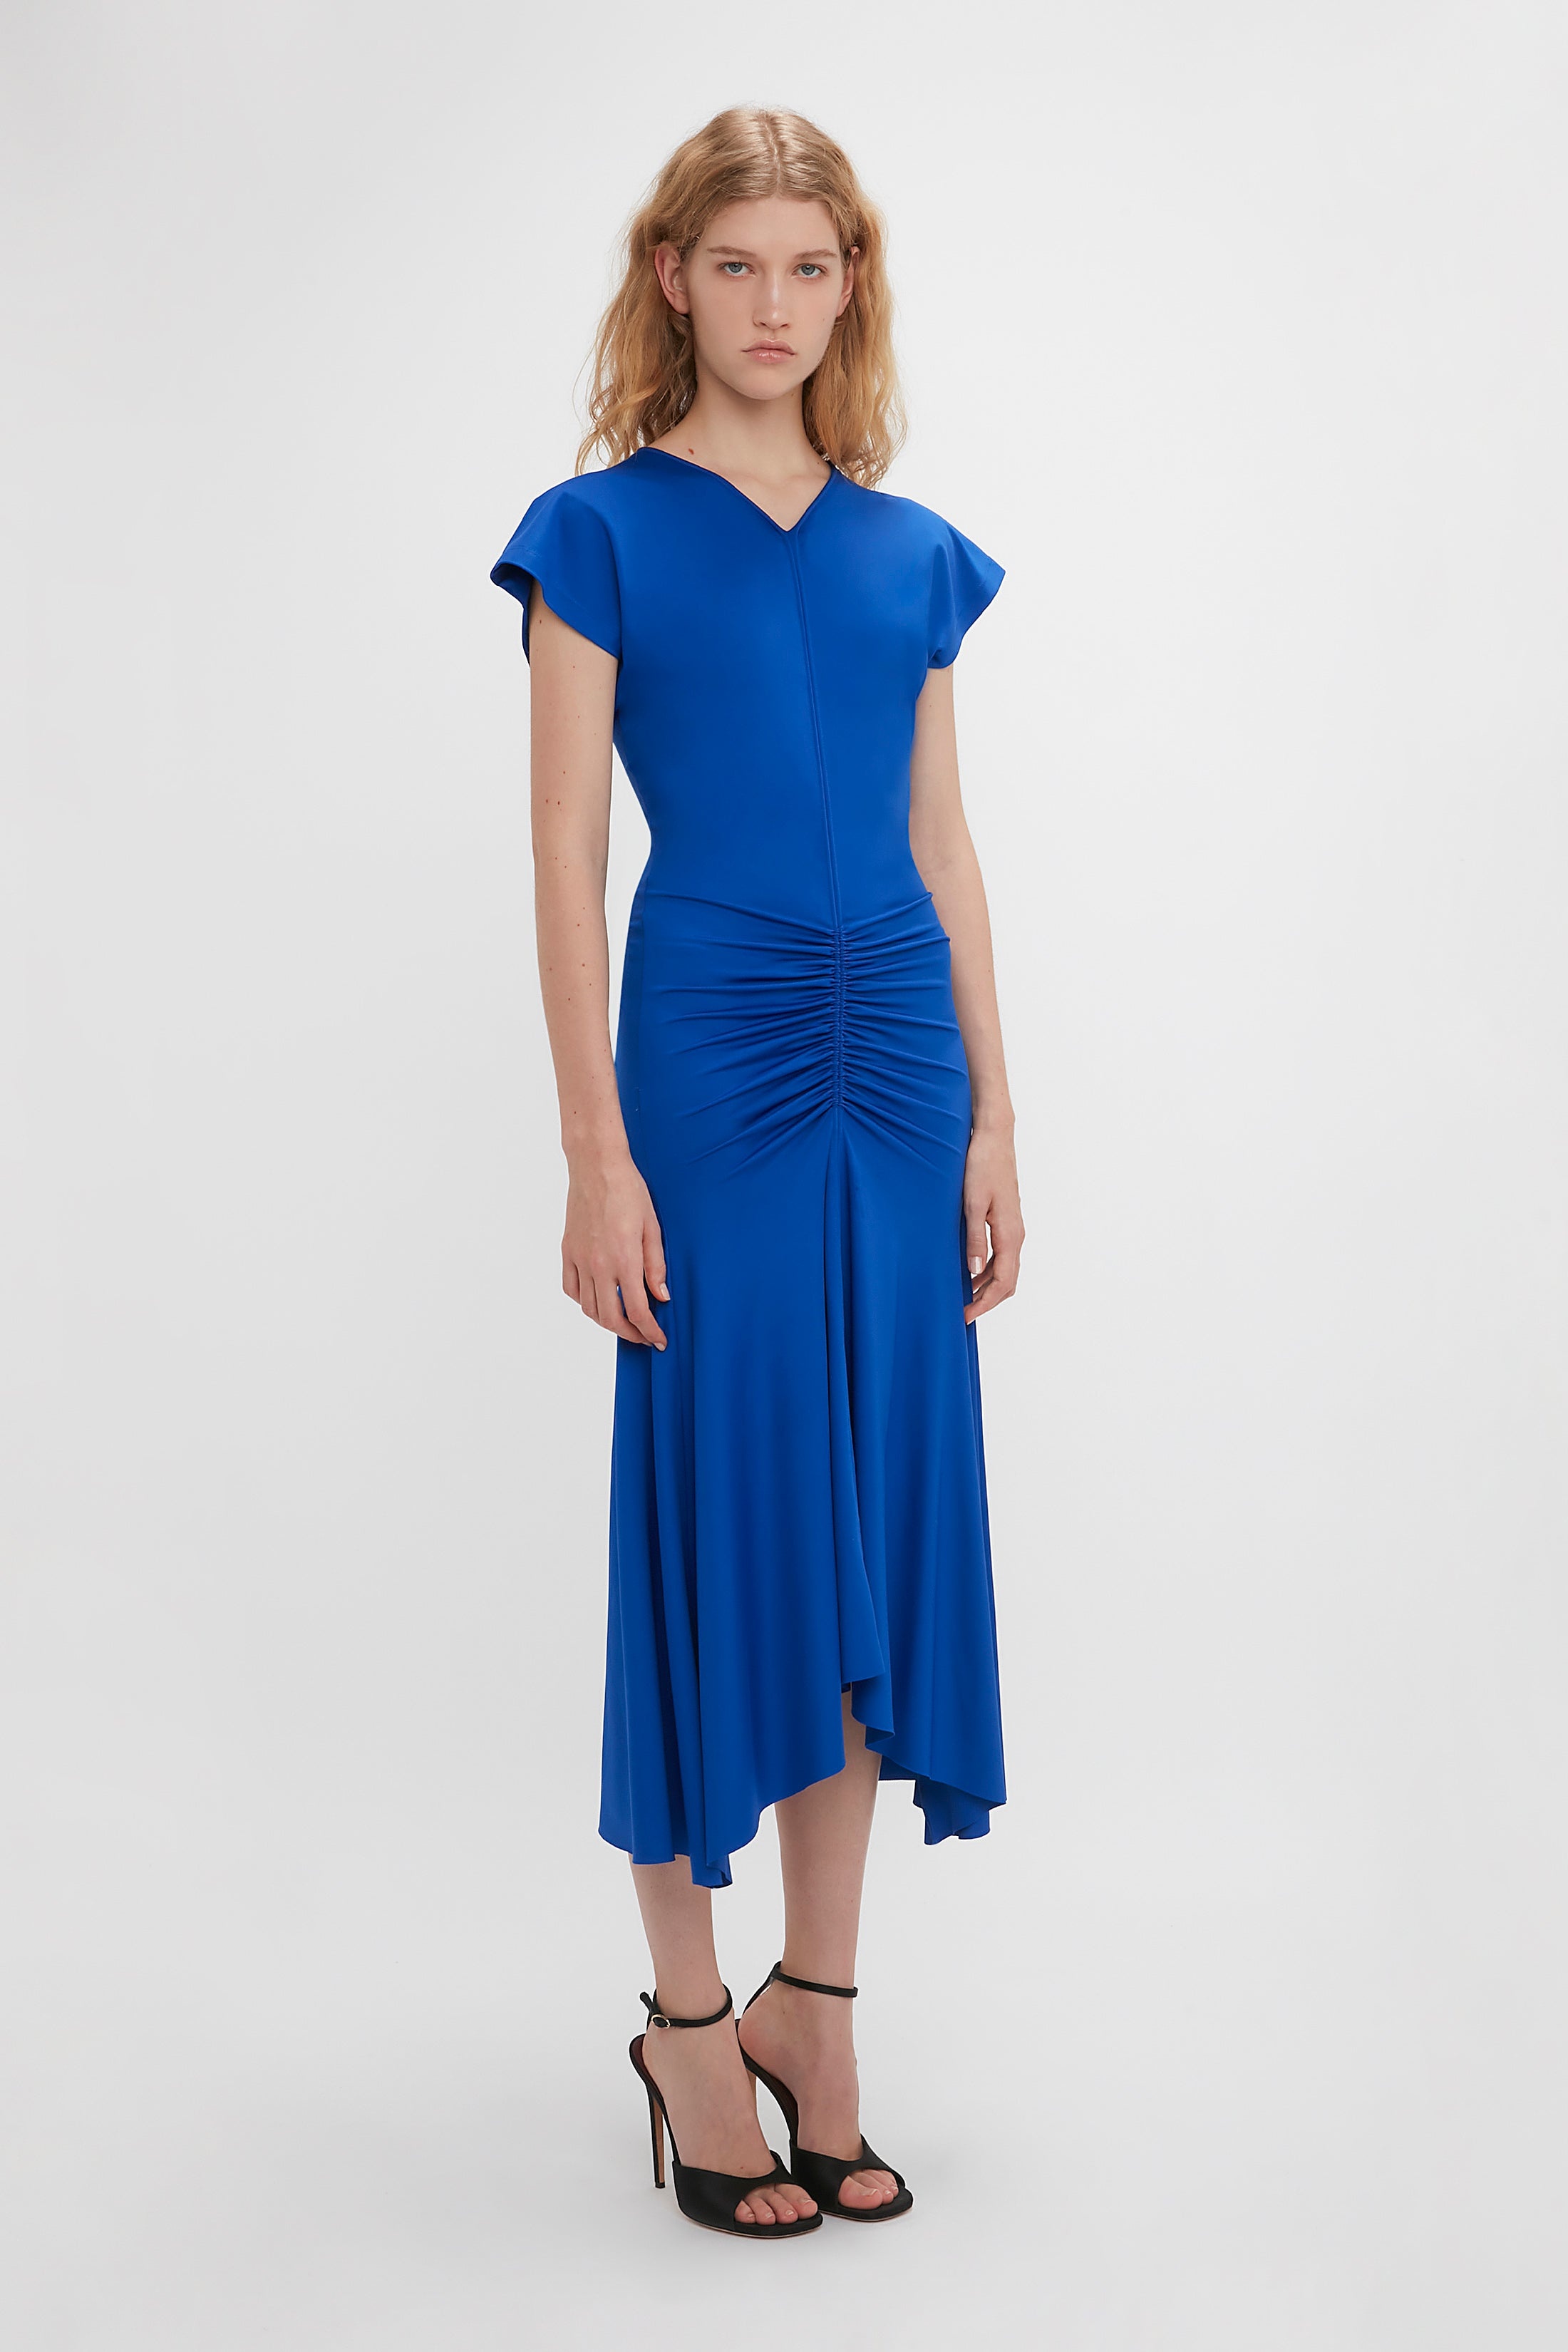 Sleeveless Rouched Jersey Dress In Royal Blue - 3